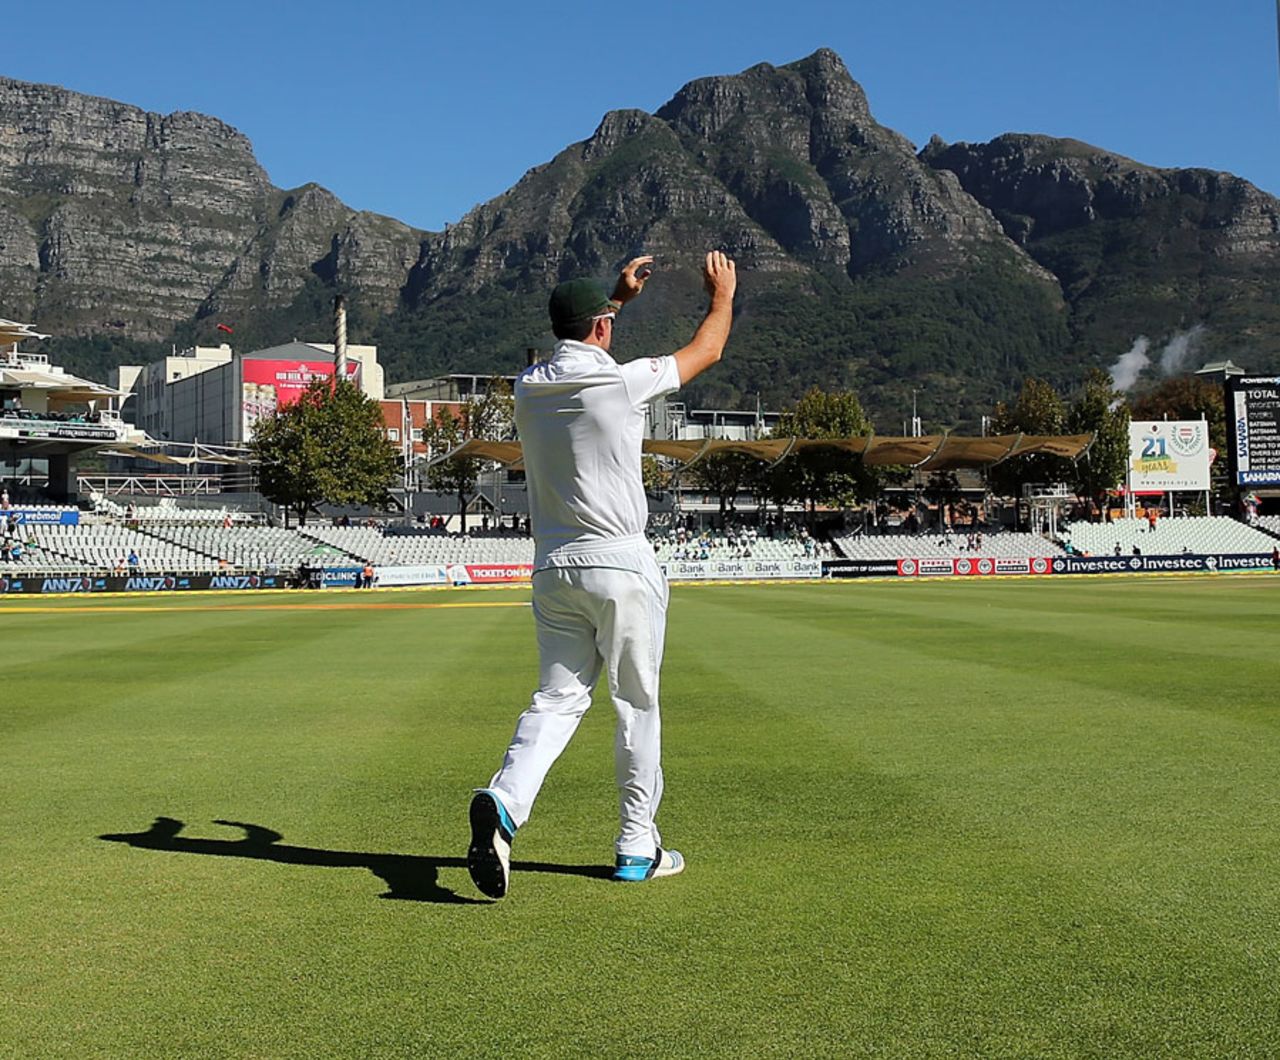 Graeme Smith steps out for his final Test, South Africa v Australia, 3rd Test, Cape Town, 4th day, March 4, 2014